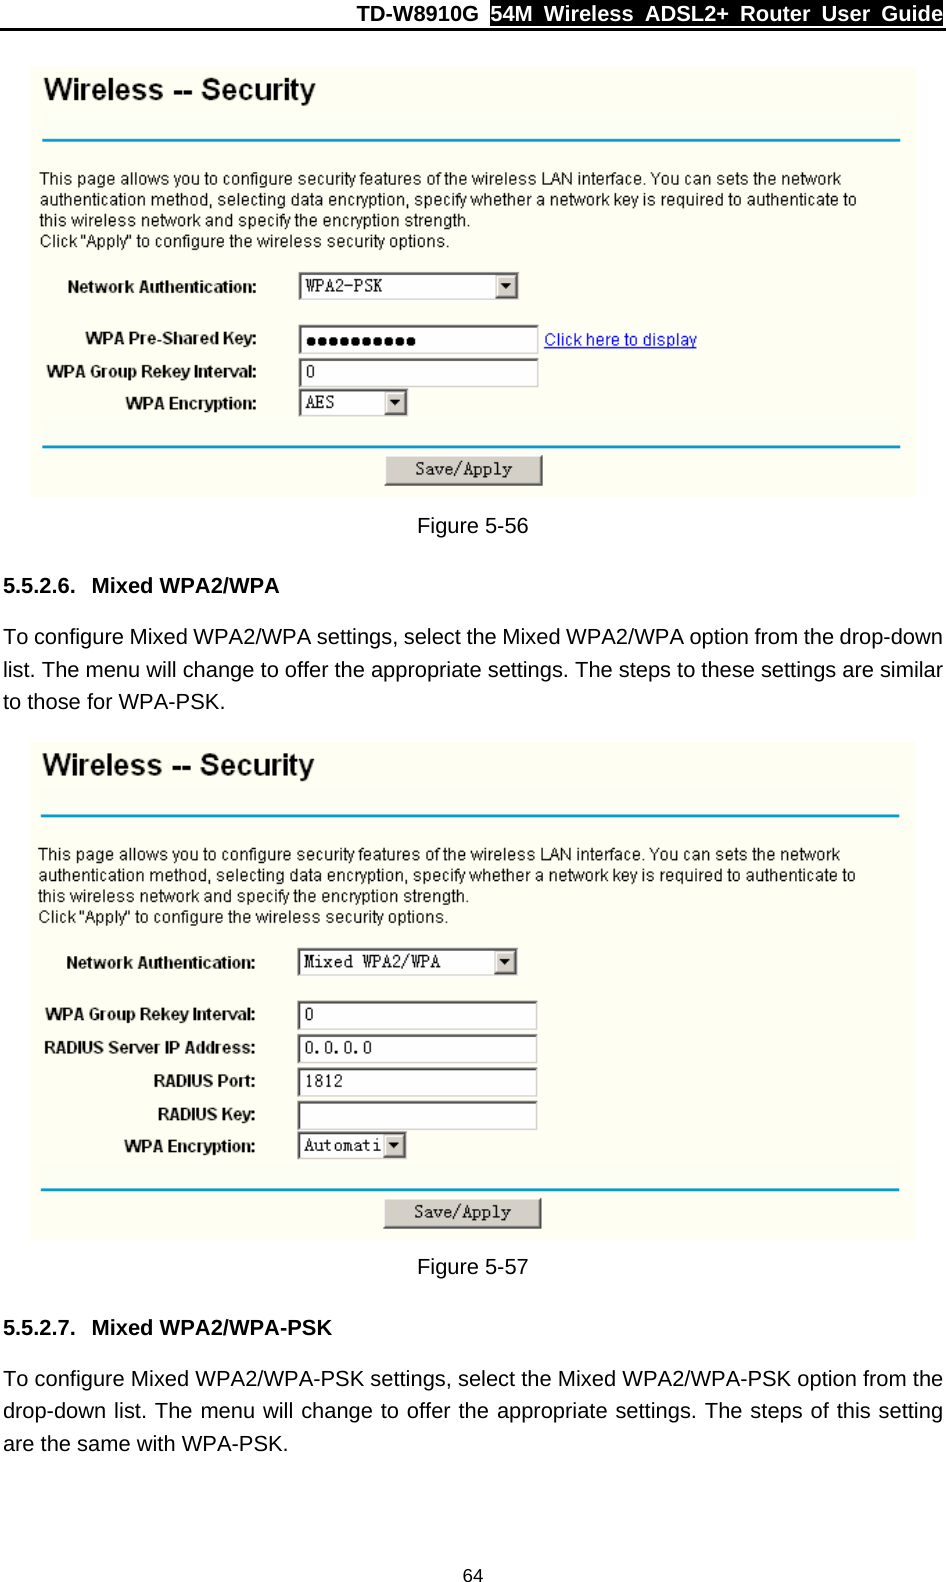 TD-W8910G  54M Wireless ADSL2+ Router User Guide  64 Figure 5-56 5.5.2.6. Mixed WPA2/WPA To configure Mixed WPA2/WPA settings, select the Mixed WPA2/WPA option from the drop-down list. The menu will change to offer the appropriate settings. The steps to these settings are similar to those for WPA-PSK.  Figure 5-57 5.5.2.7. Mixed WPA2/WPA-PSK To configure Mixed WPA2/WPA-PSK settings, select the Mixed WPA2/WPA-PSK option from the drop-down list. The menu will change to offer the appropriate settings. The steps of this setting are the same with WPA-PSK. 